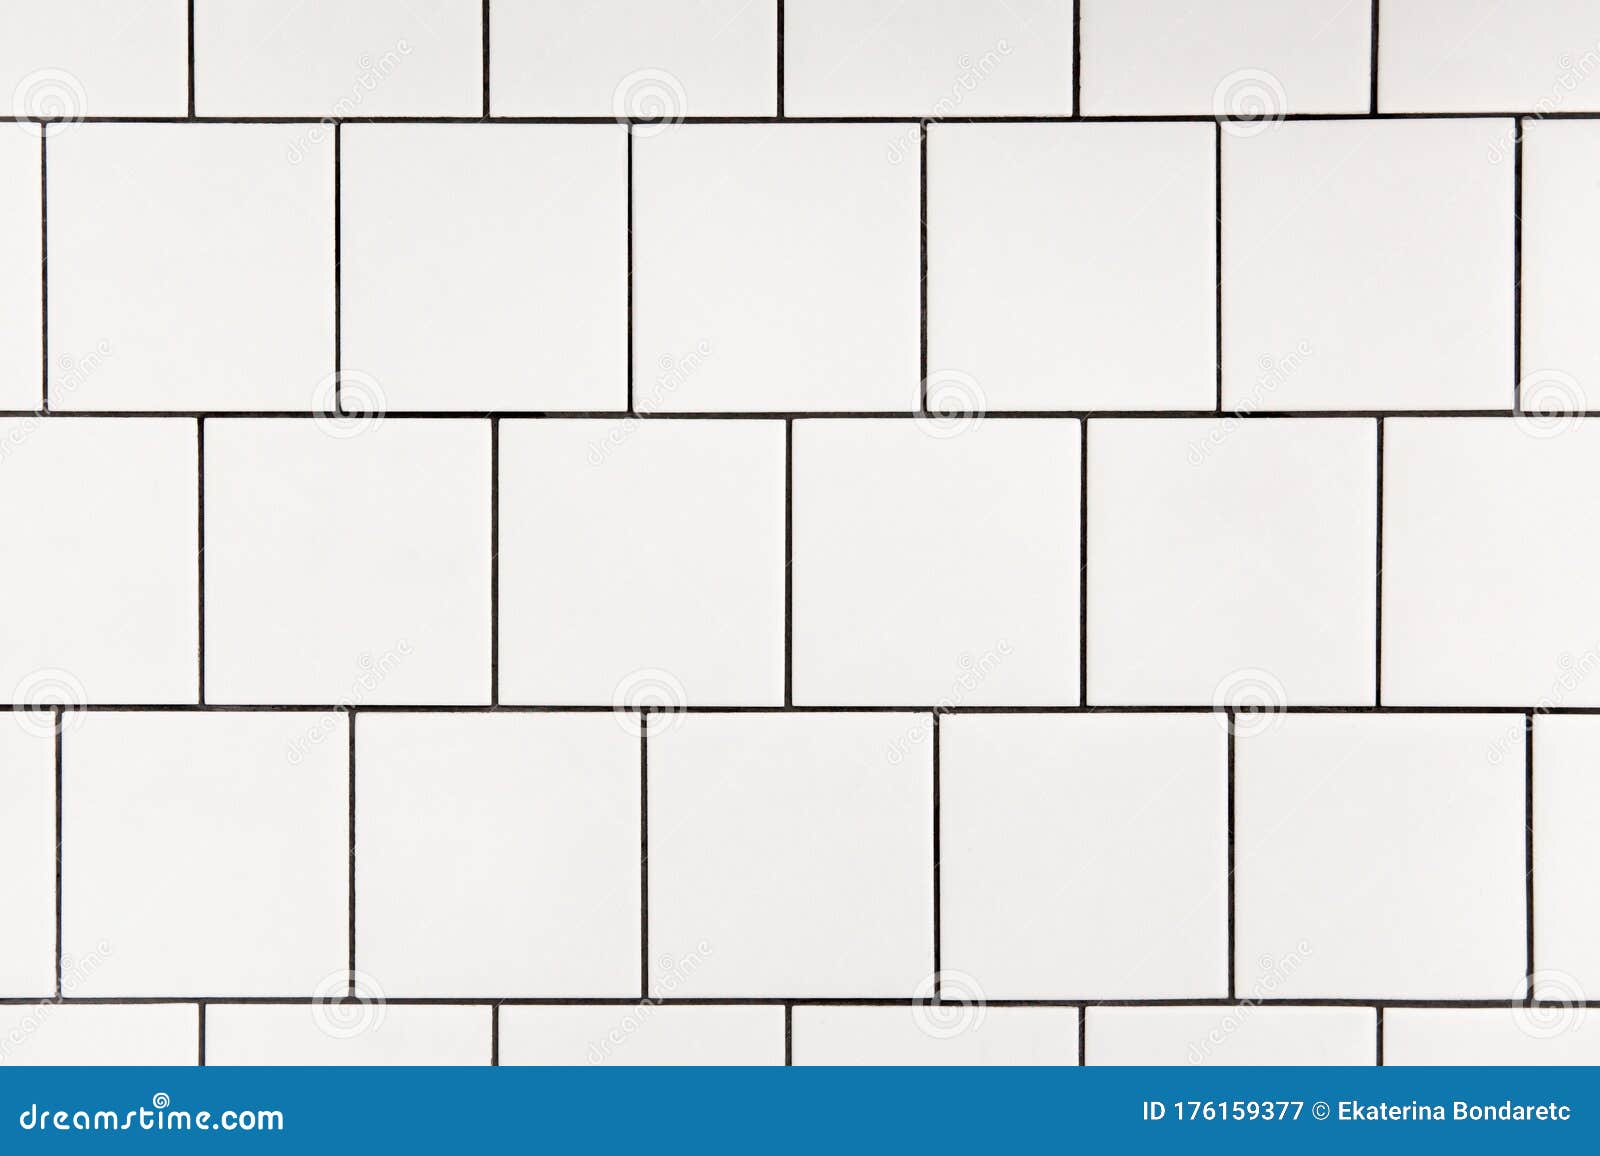 white square ceramic tile with black seam, located horizontally. abstract background, ceramic texture.